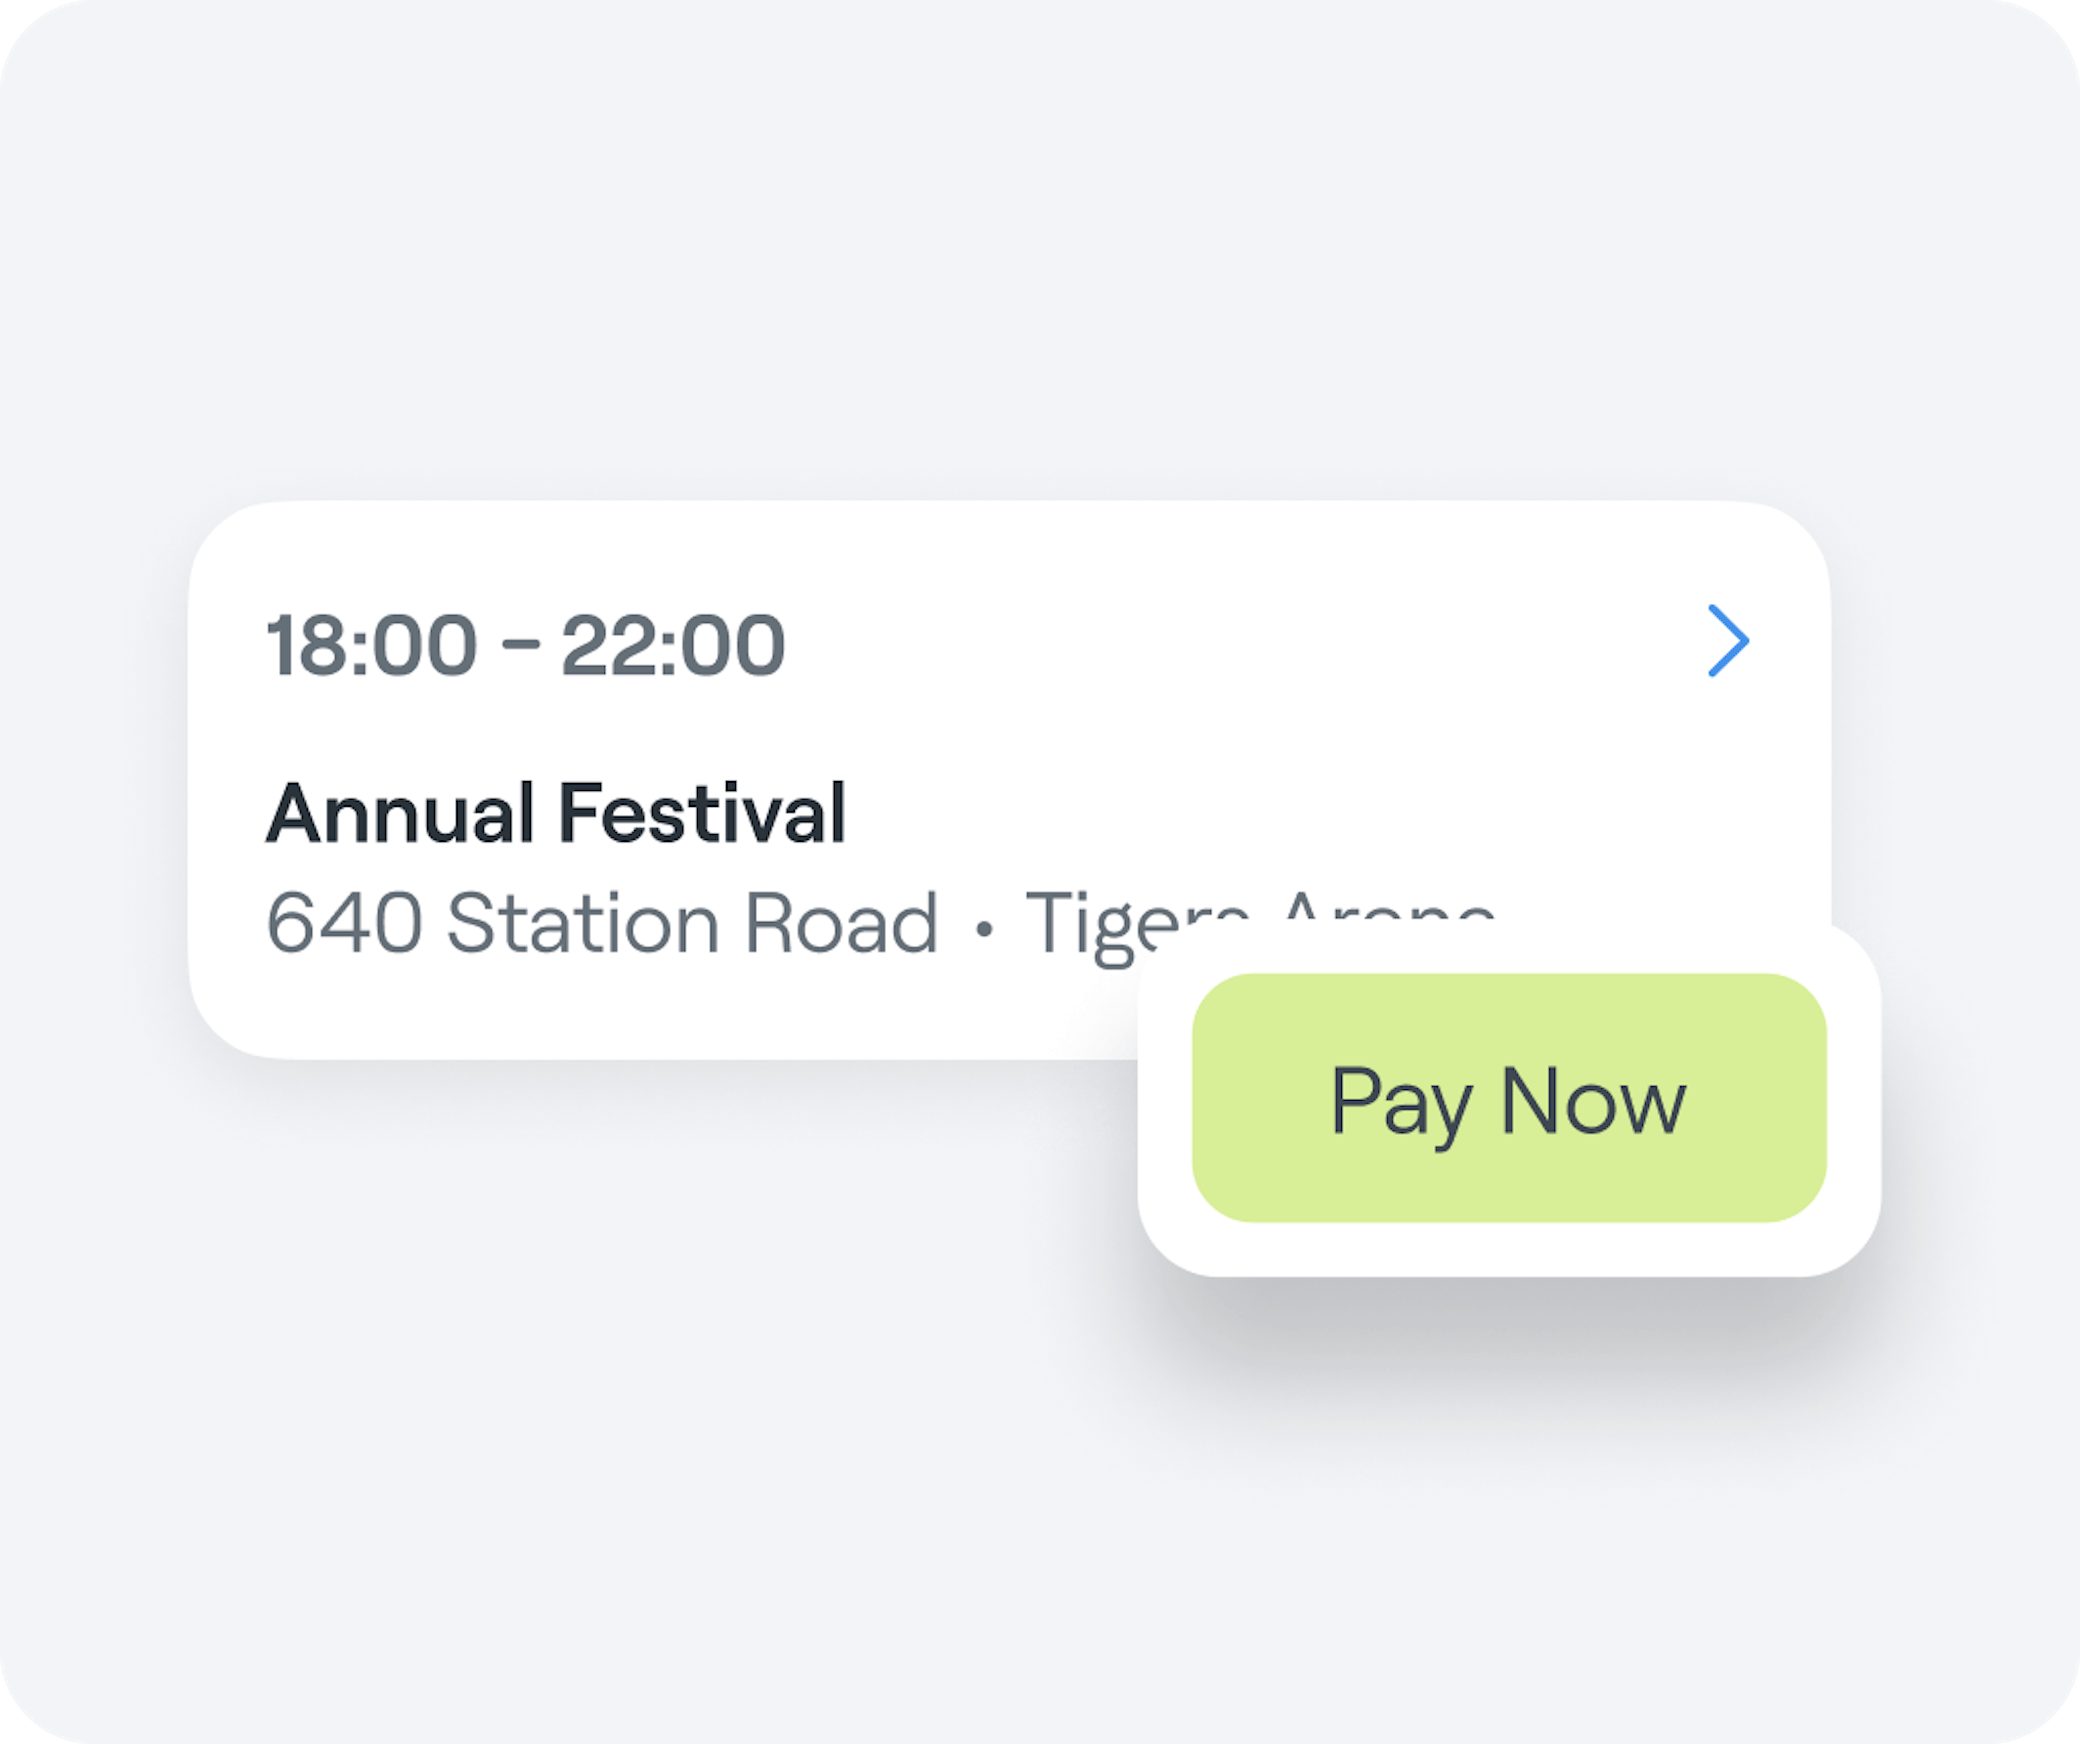 Interface graphic showing a payable event on Abler and a one-click payment option